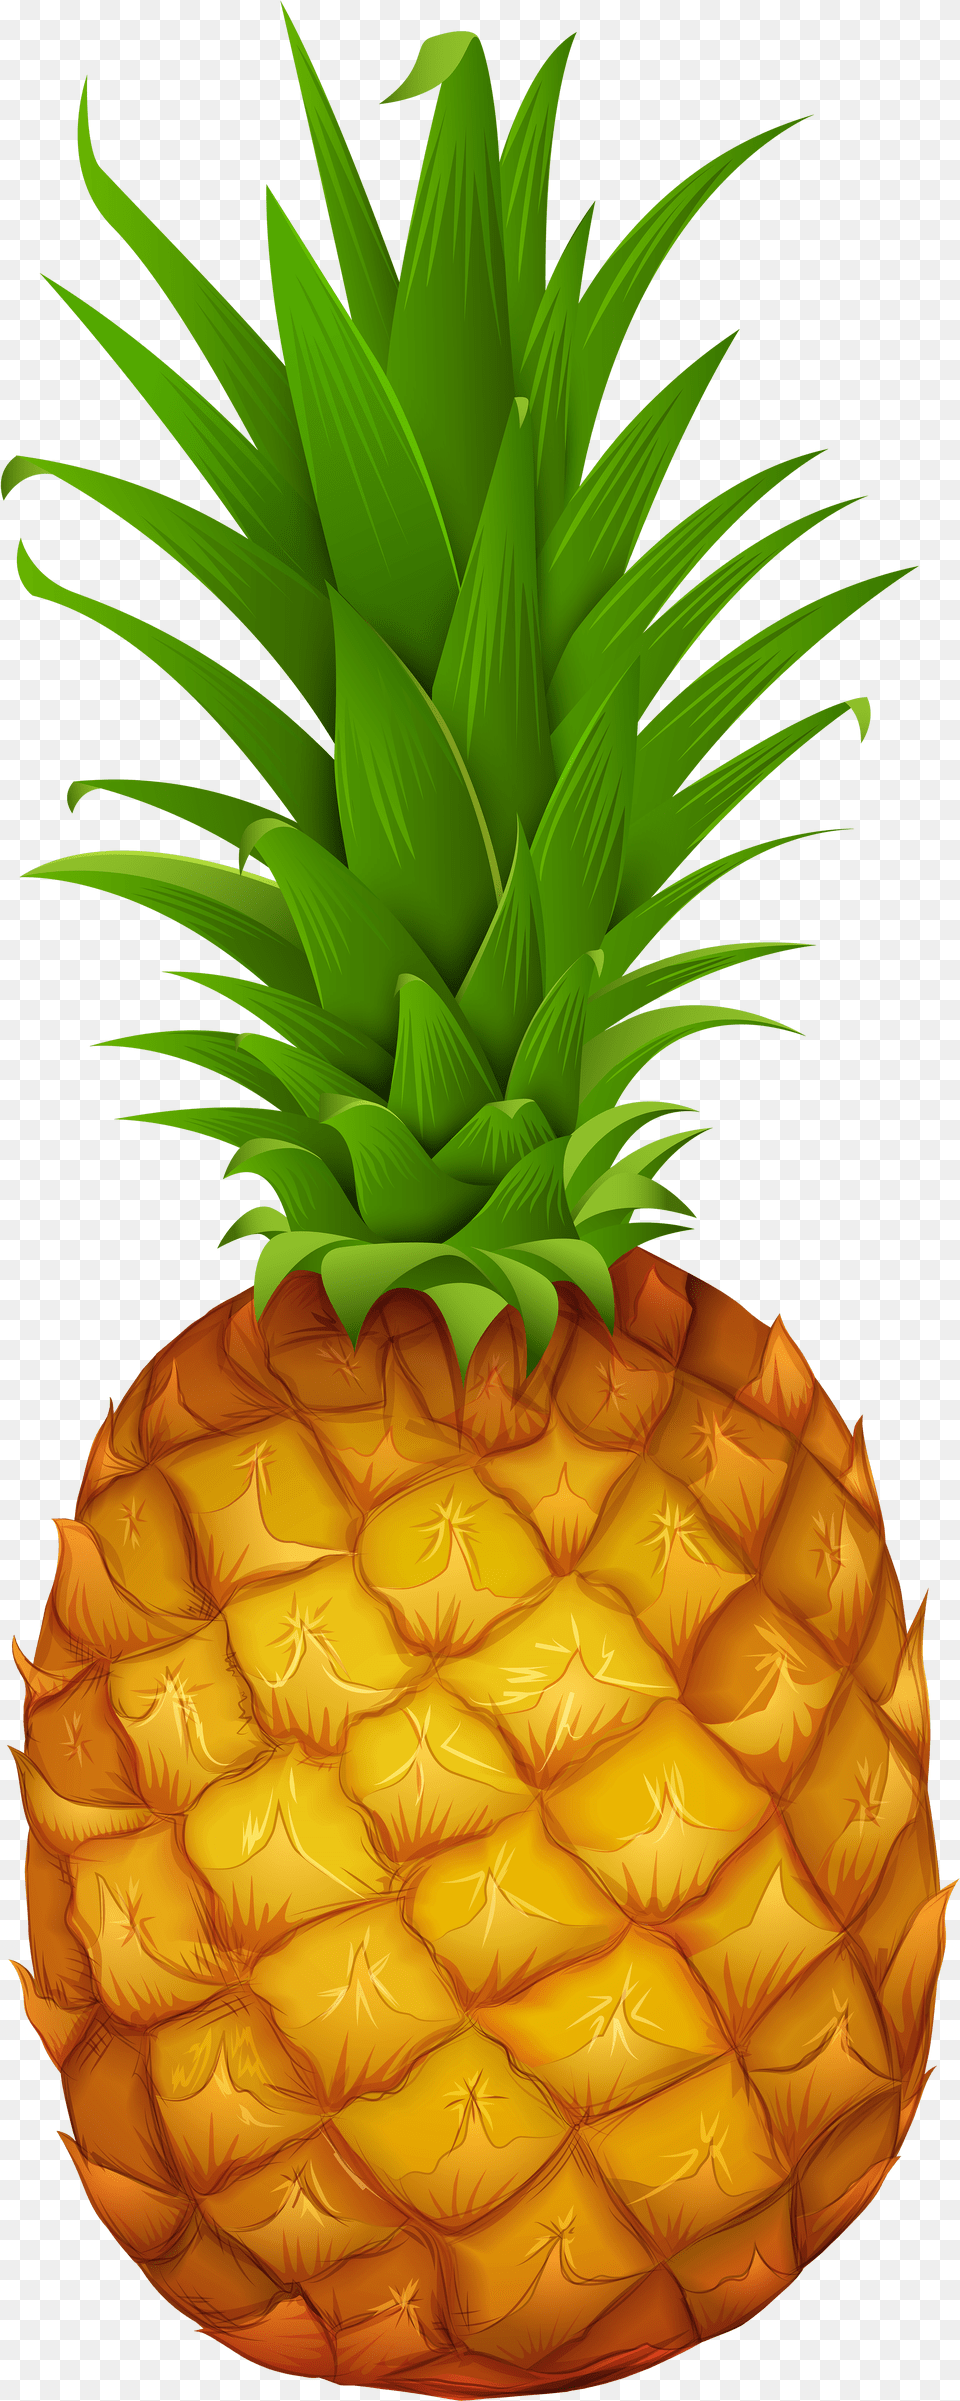 Clip Art Pineapple Gallery Yopriceville High Clip Art Pineapple Png Image